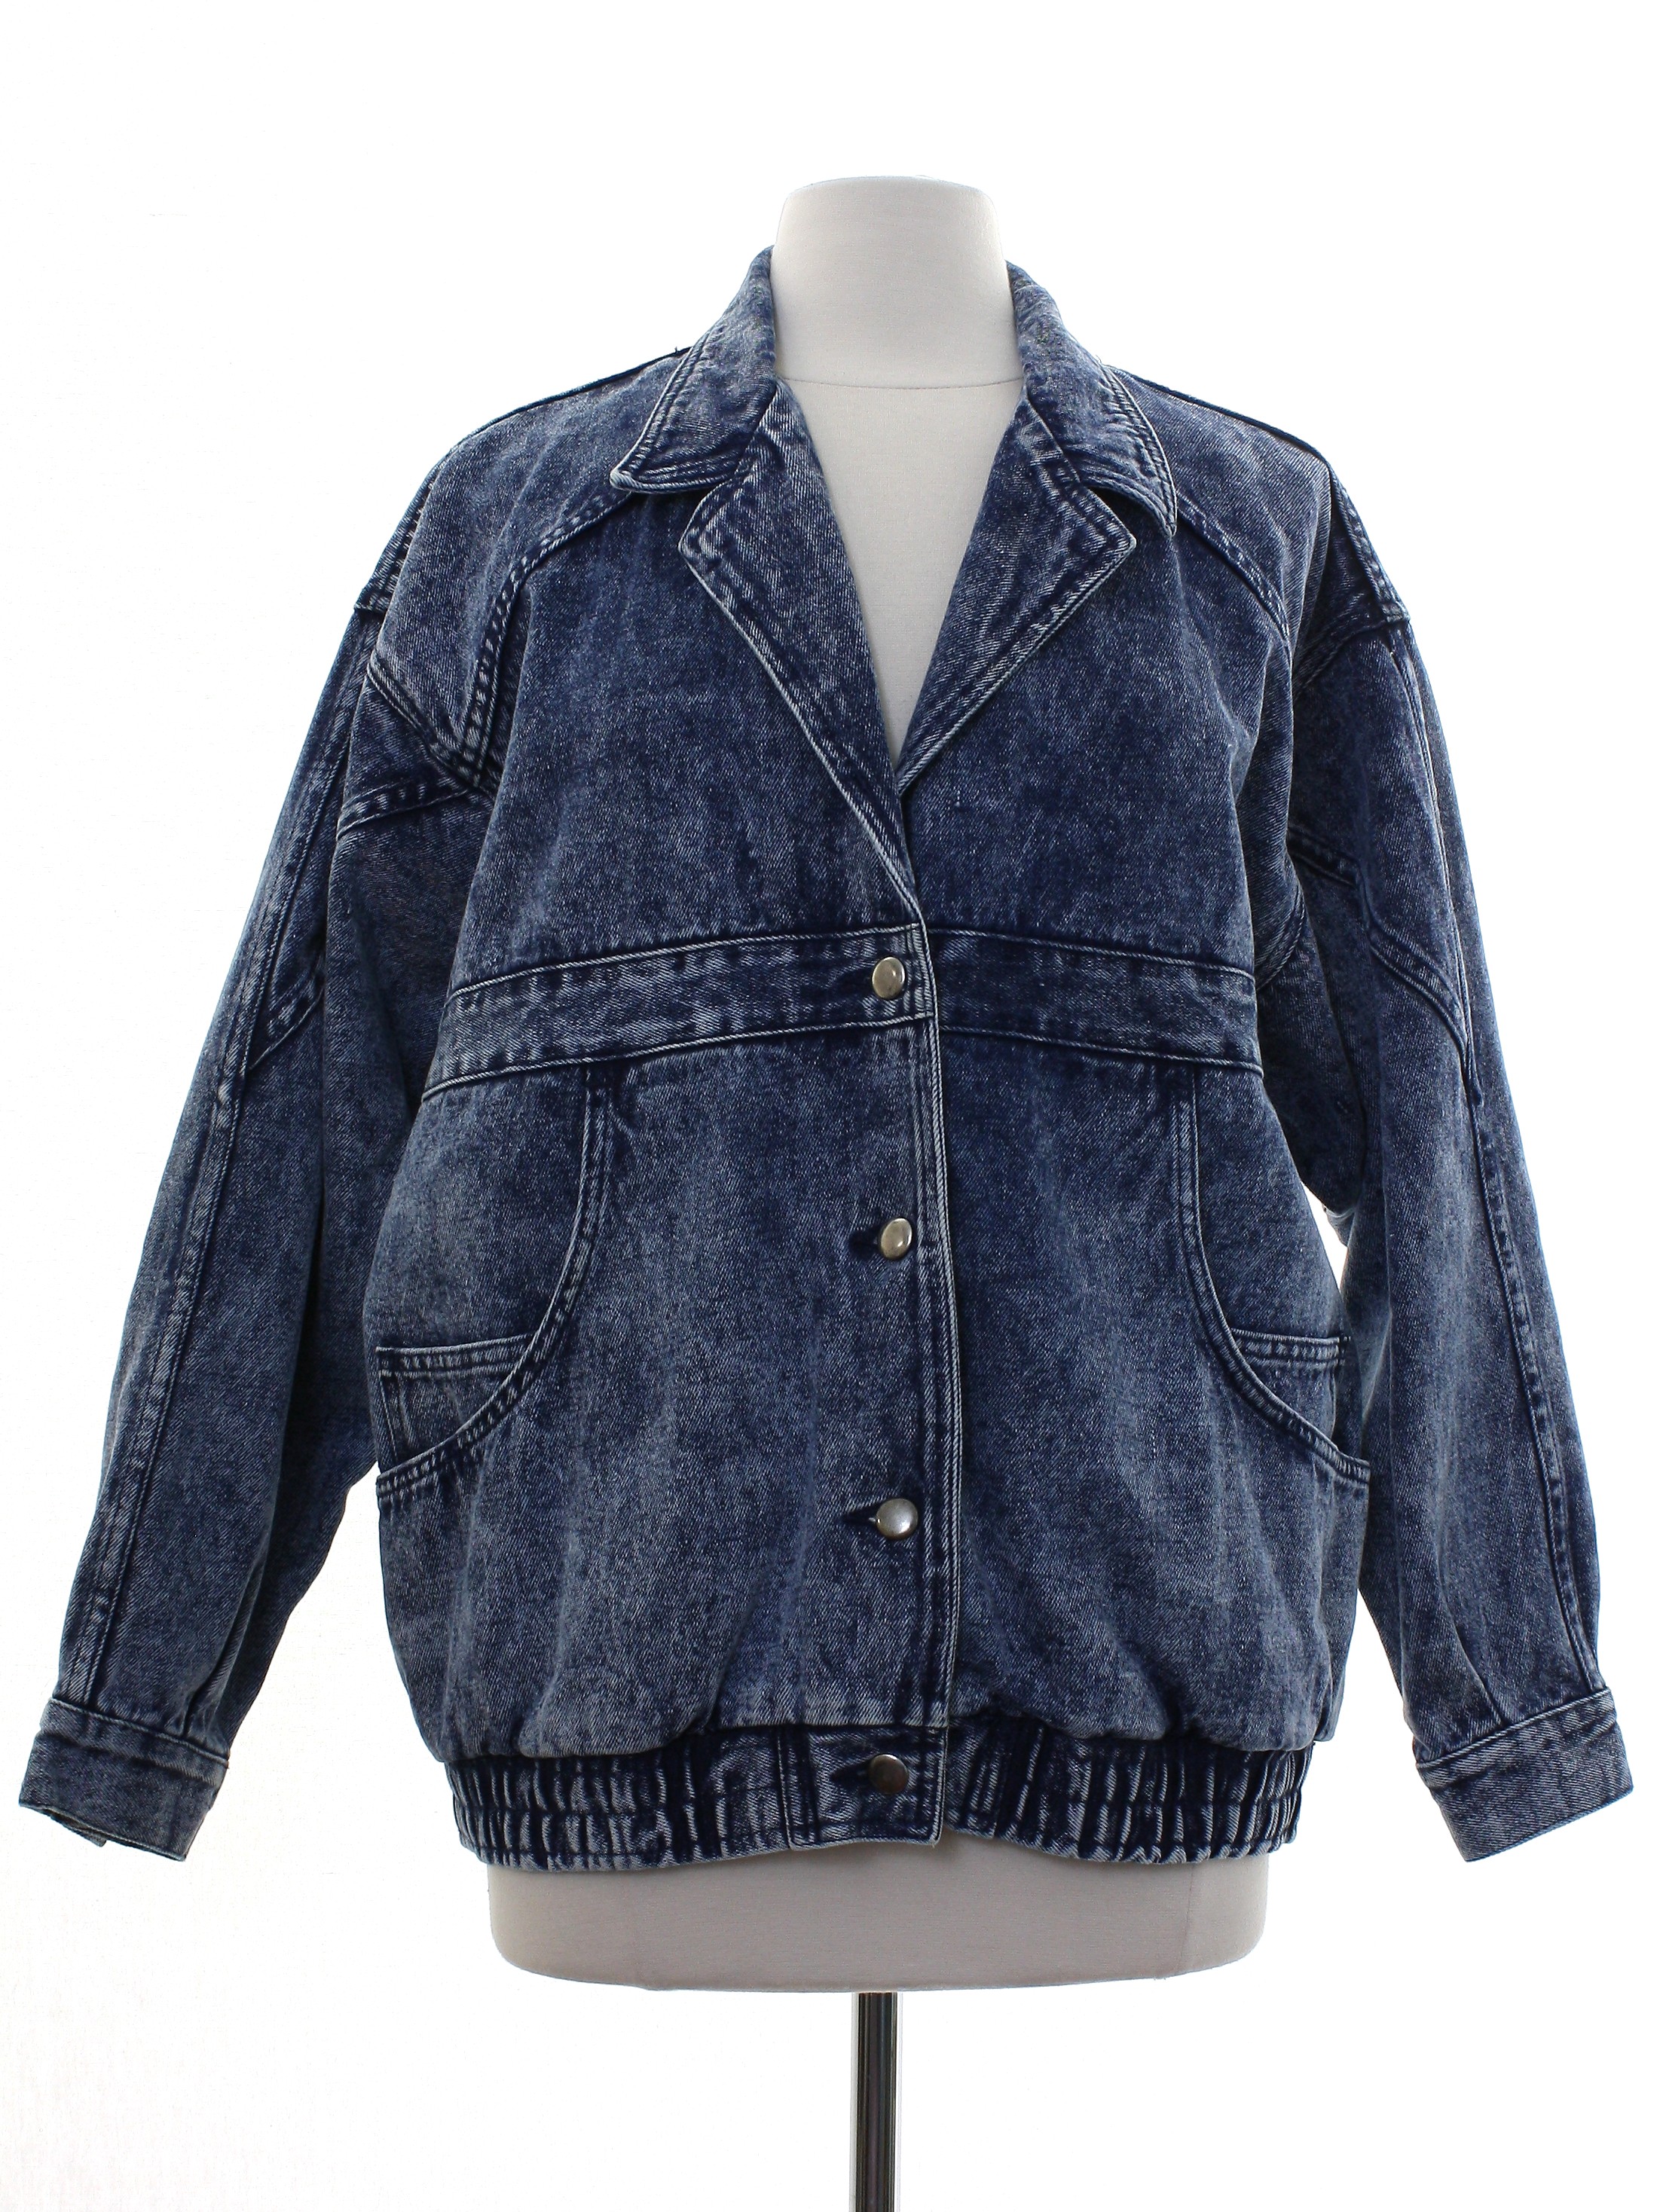 80s jean jacket with buttons